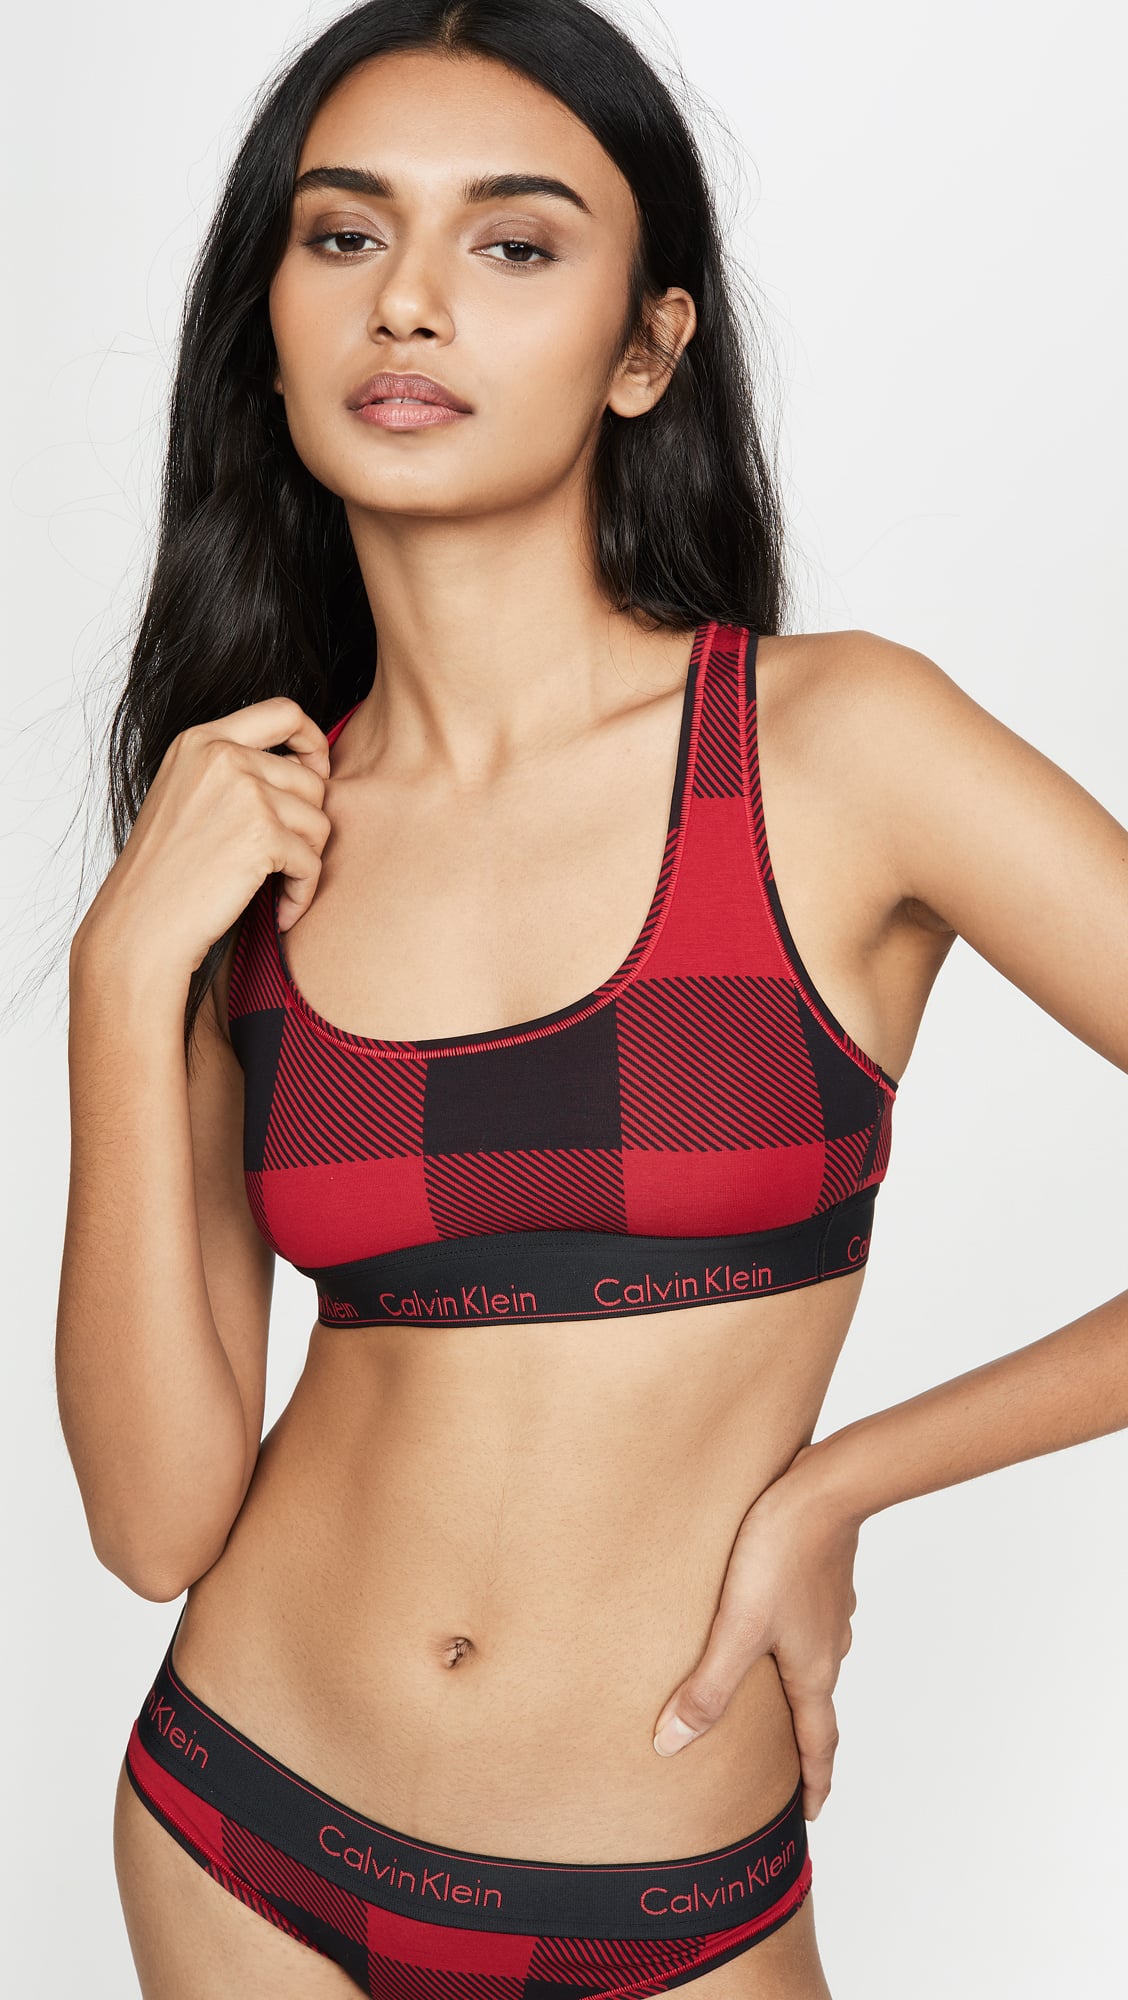 Calvin Klein Underwear Modern Cotton Buffalo Plaid Bralette, Kendall  Jenner Wore Checkered PJs to a Holiday Party, Because Why Not?